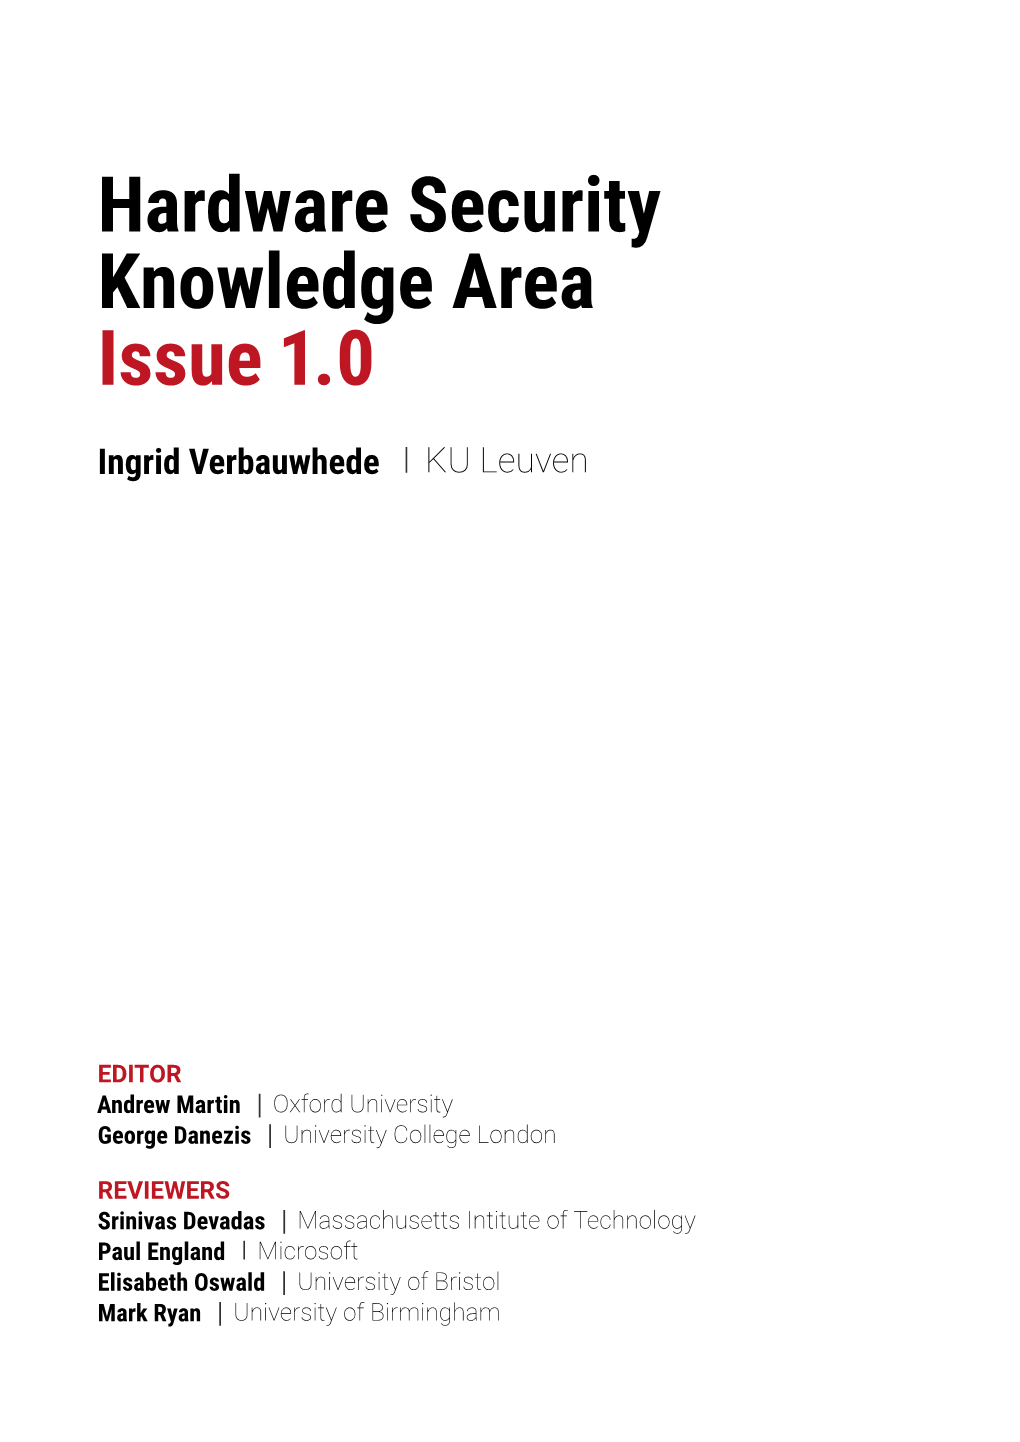 Hardware Security Knowledge Area Issue 1.0